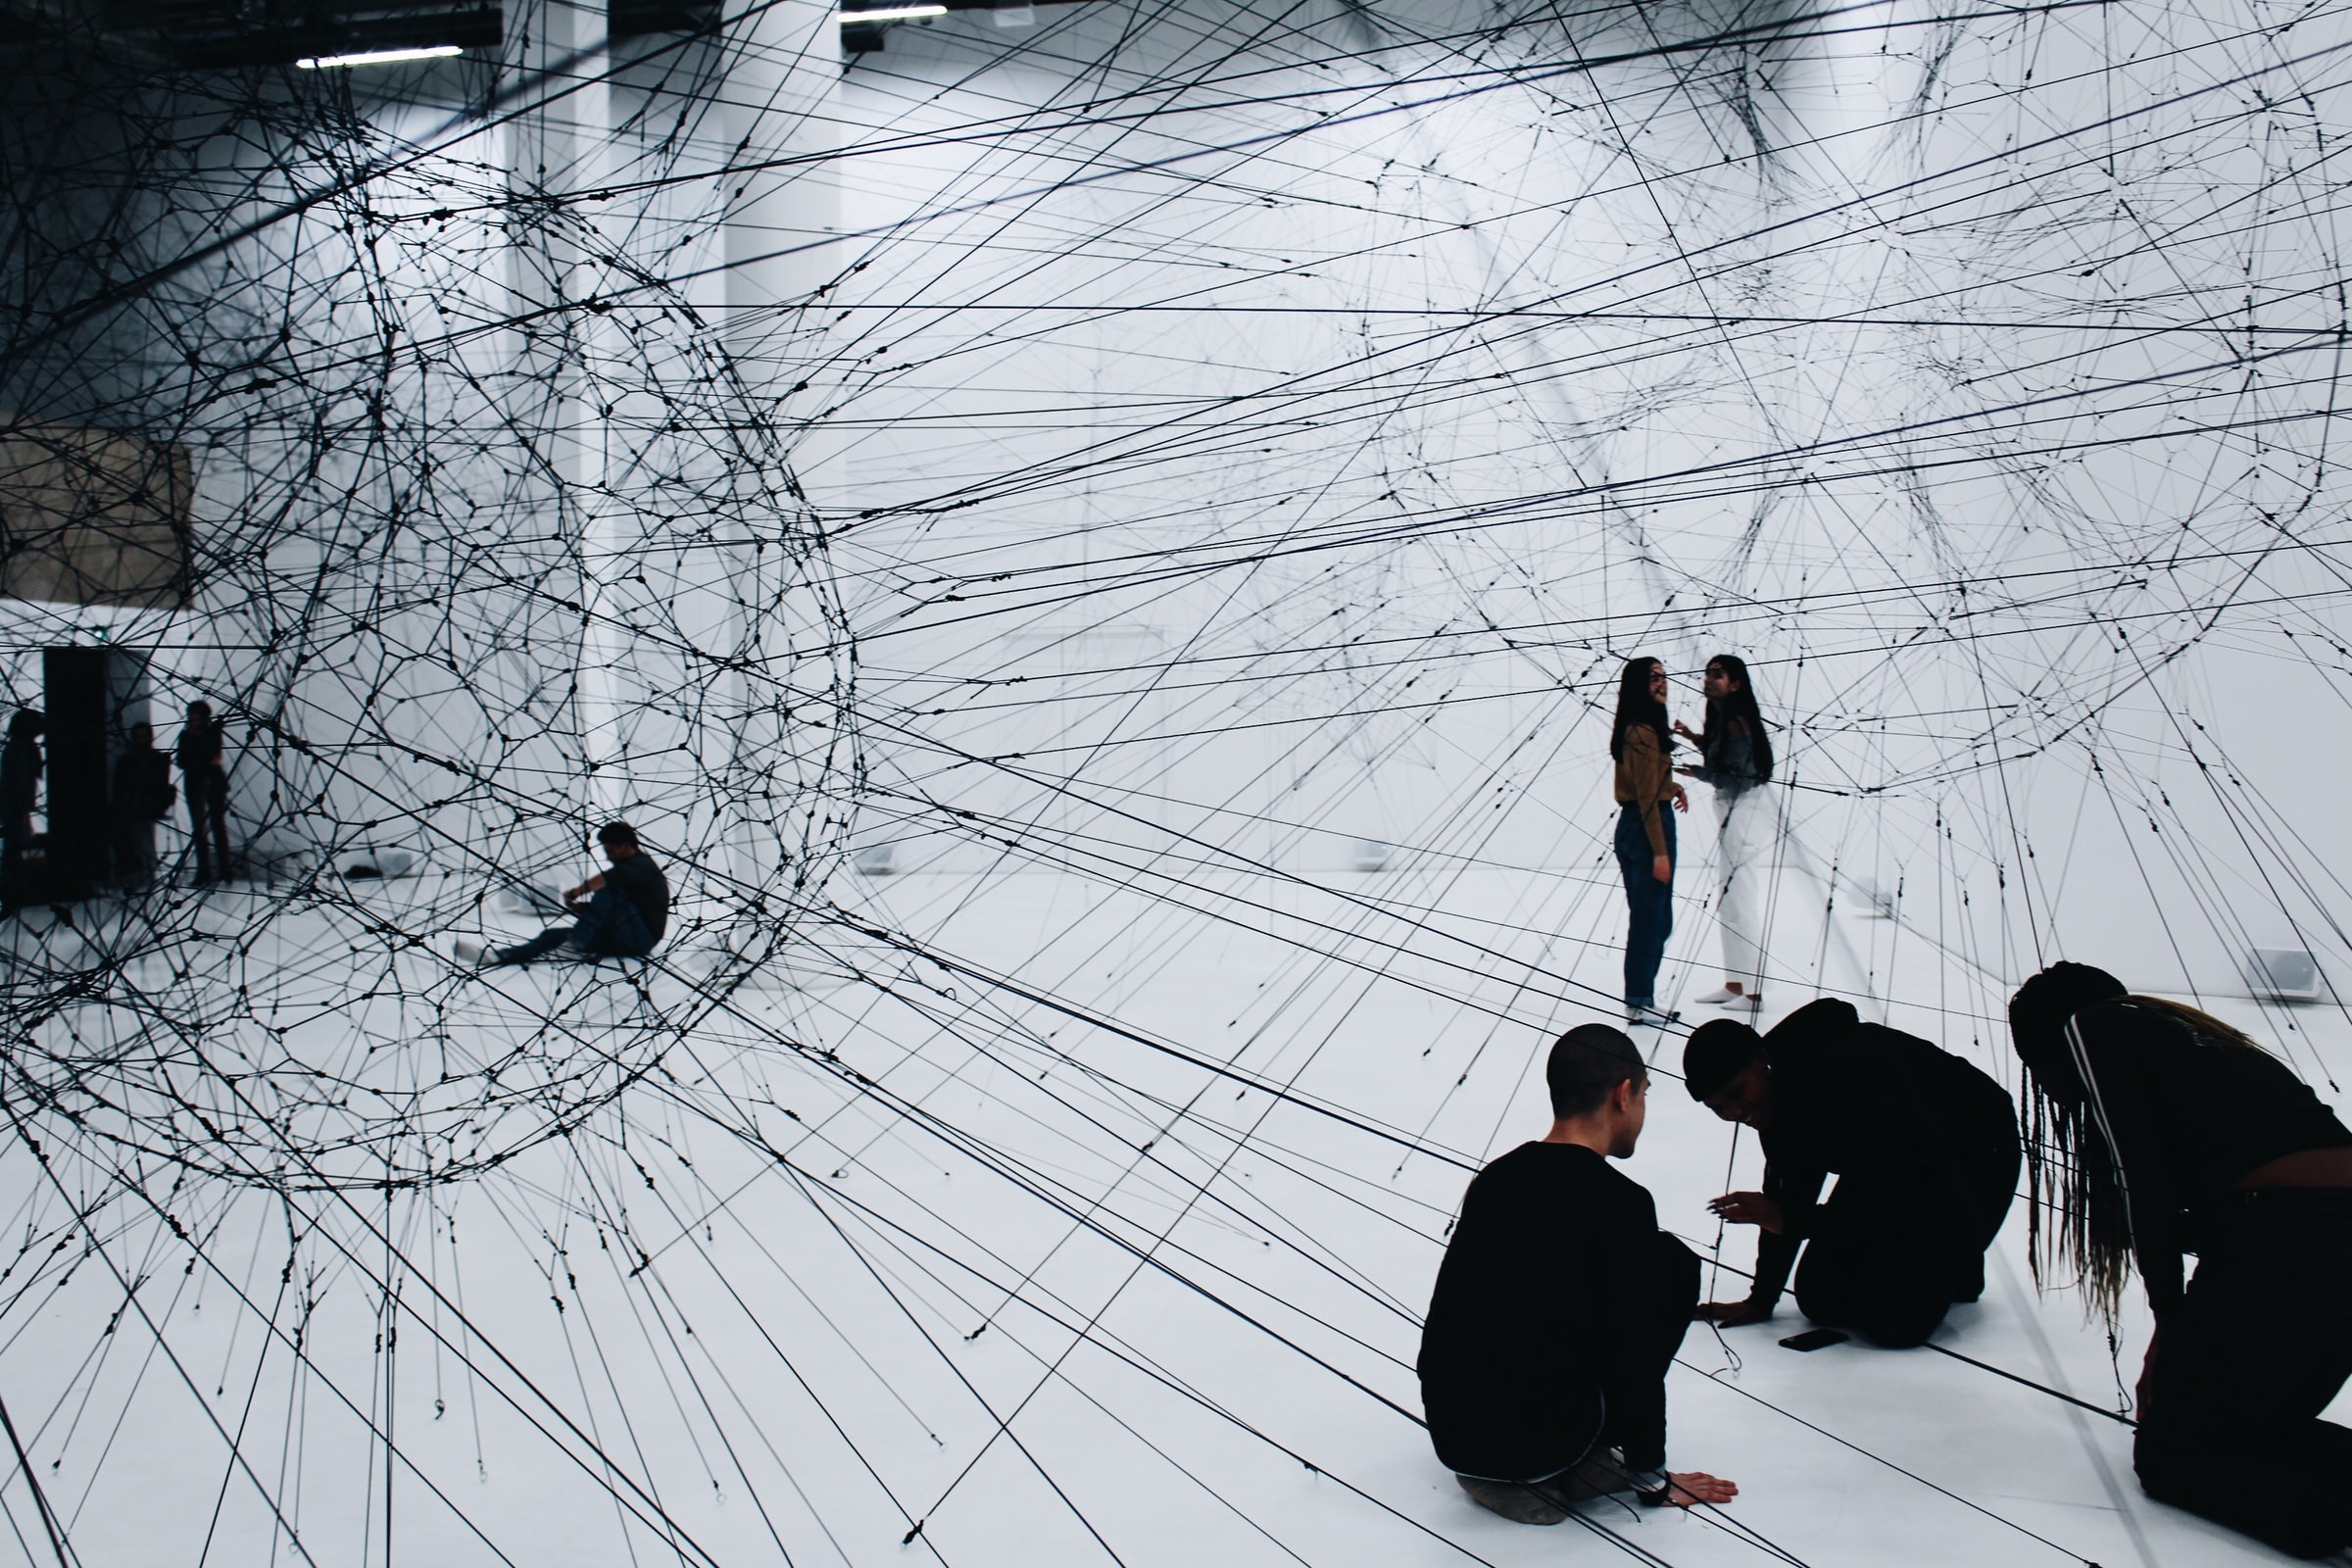 People sitting on the floor under a web of wires